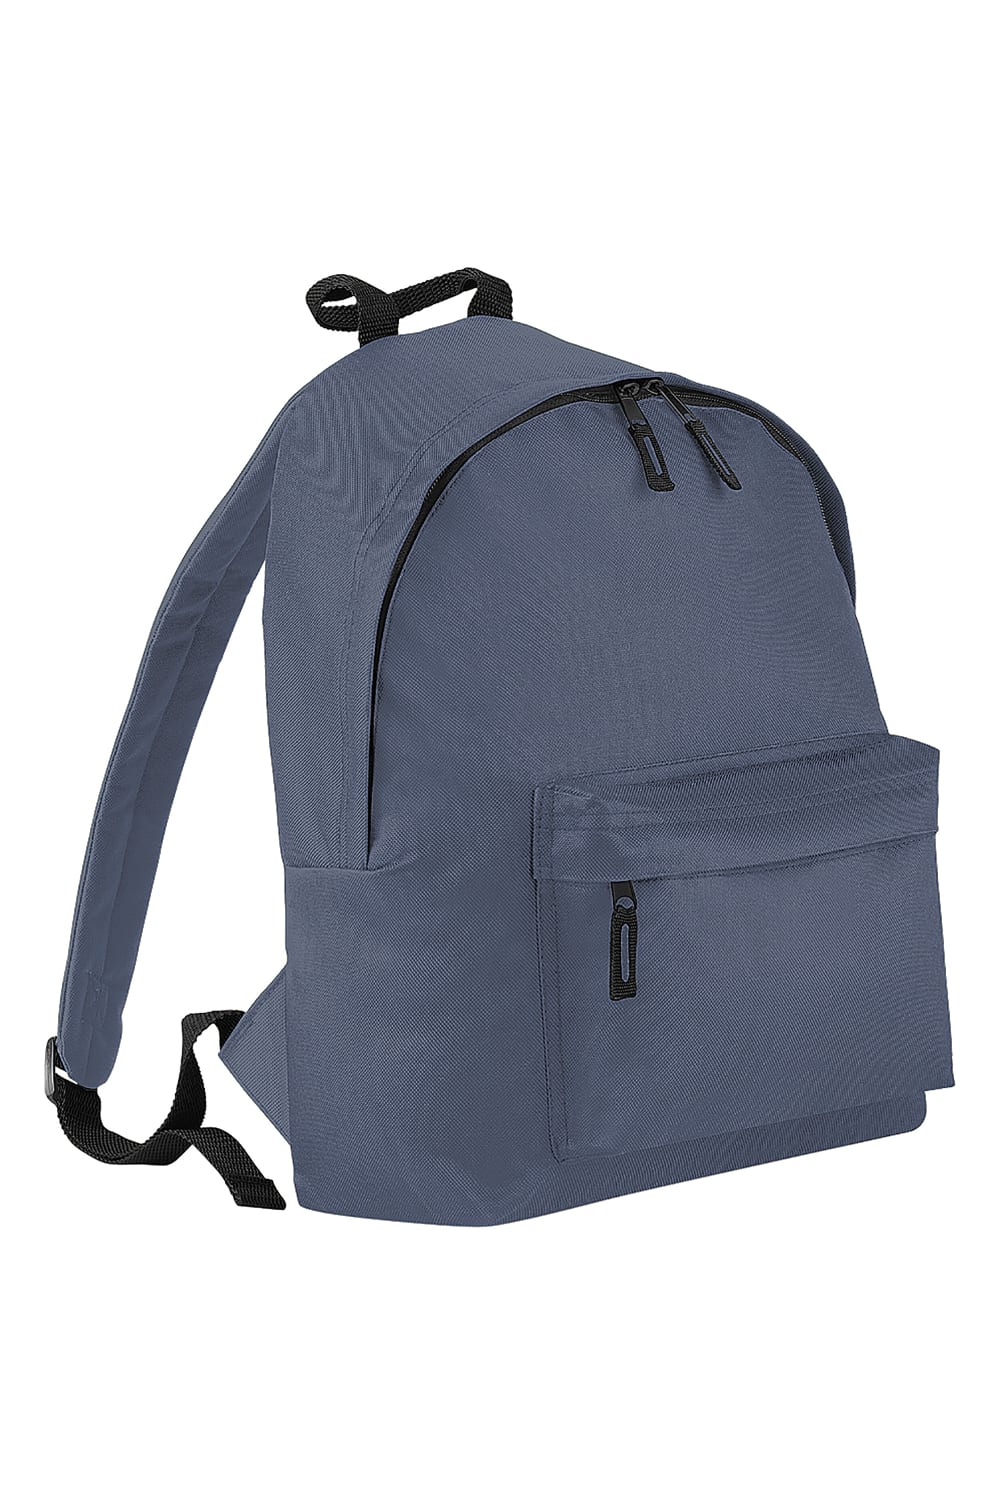 Fashion Backpack / Rucksack (18 Liters) (Pack of 2) (Airforce Blue)